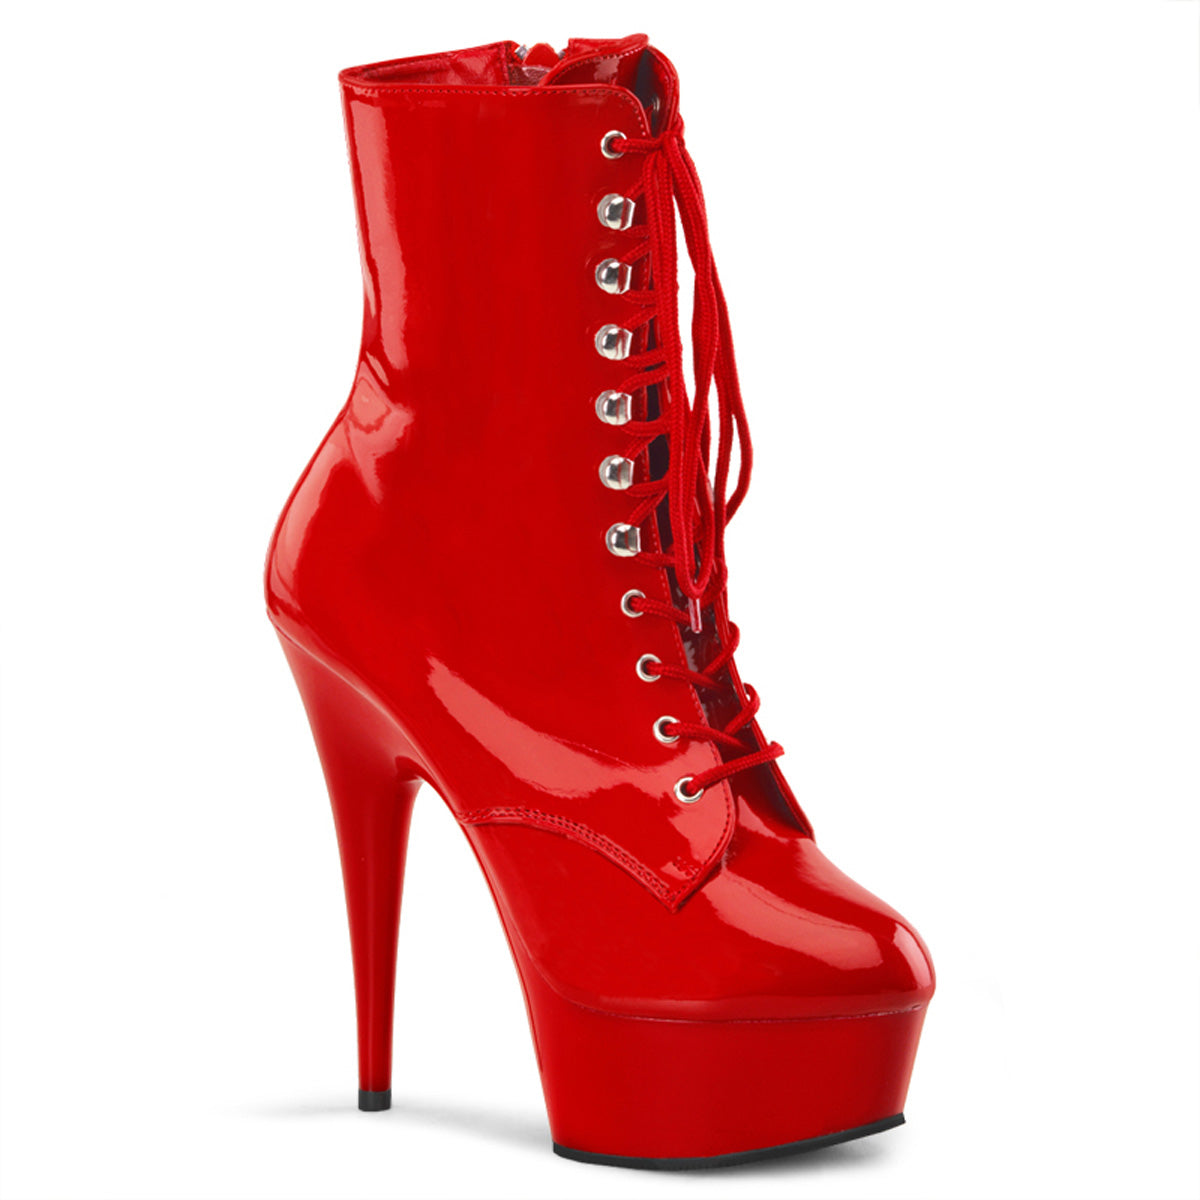 DELIGHT-1020 Red Patent/Red